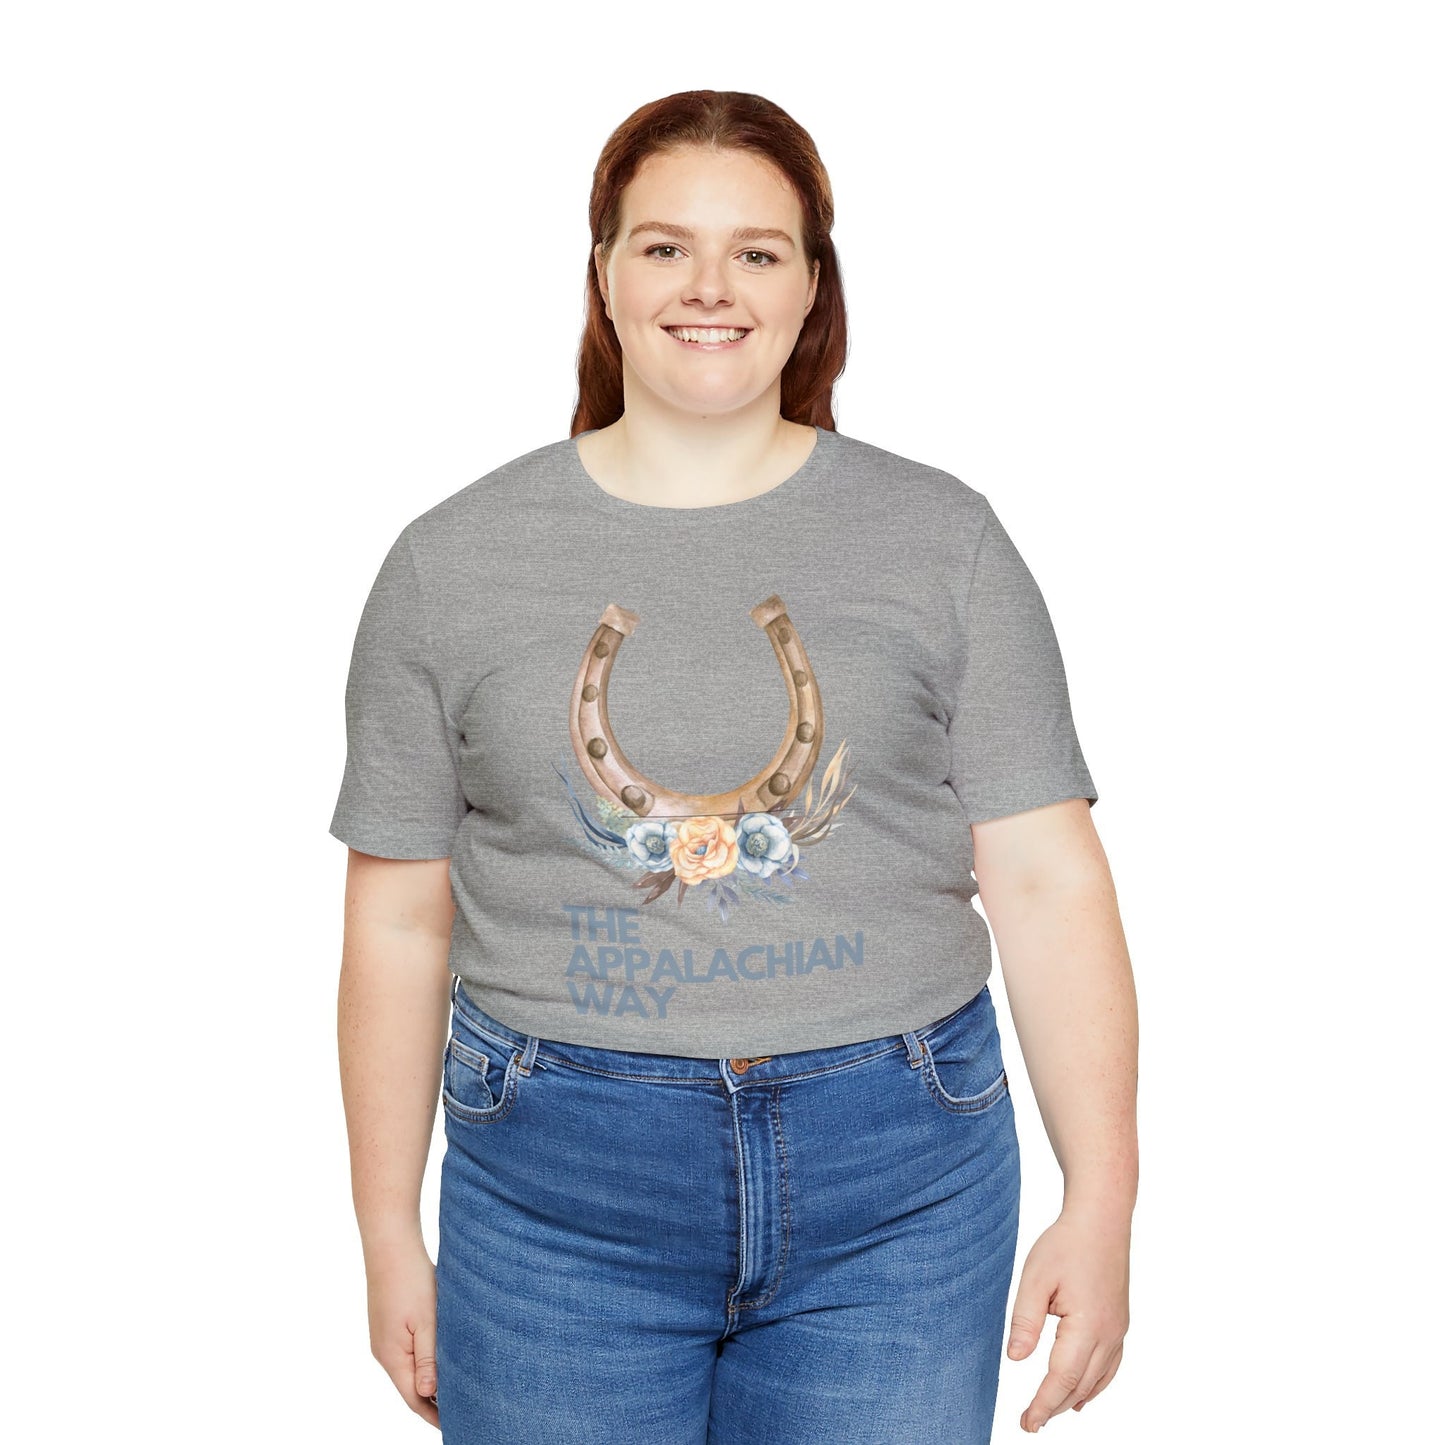 Country Horseshoe The Appalachian Way T-shirt | Western, Floral Horseshoe, Western Style Shirt, Premium Soft Unisex, Plus Size,gifts for her